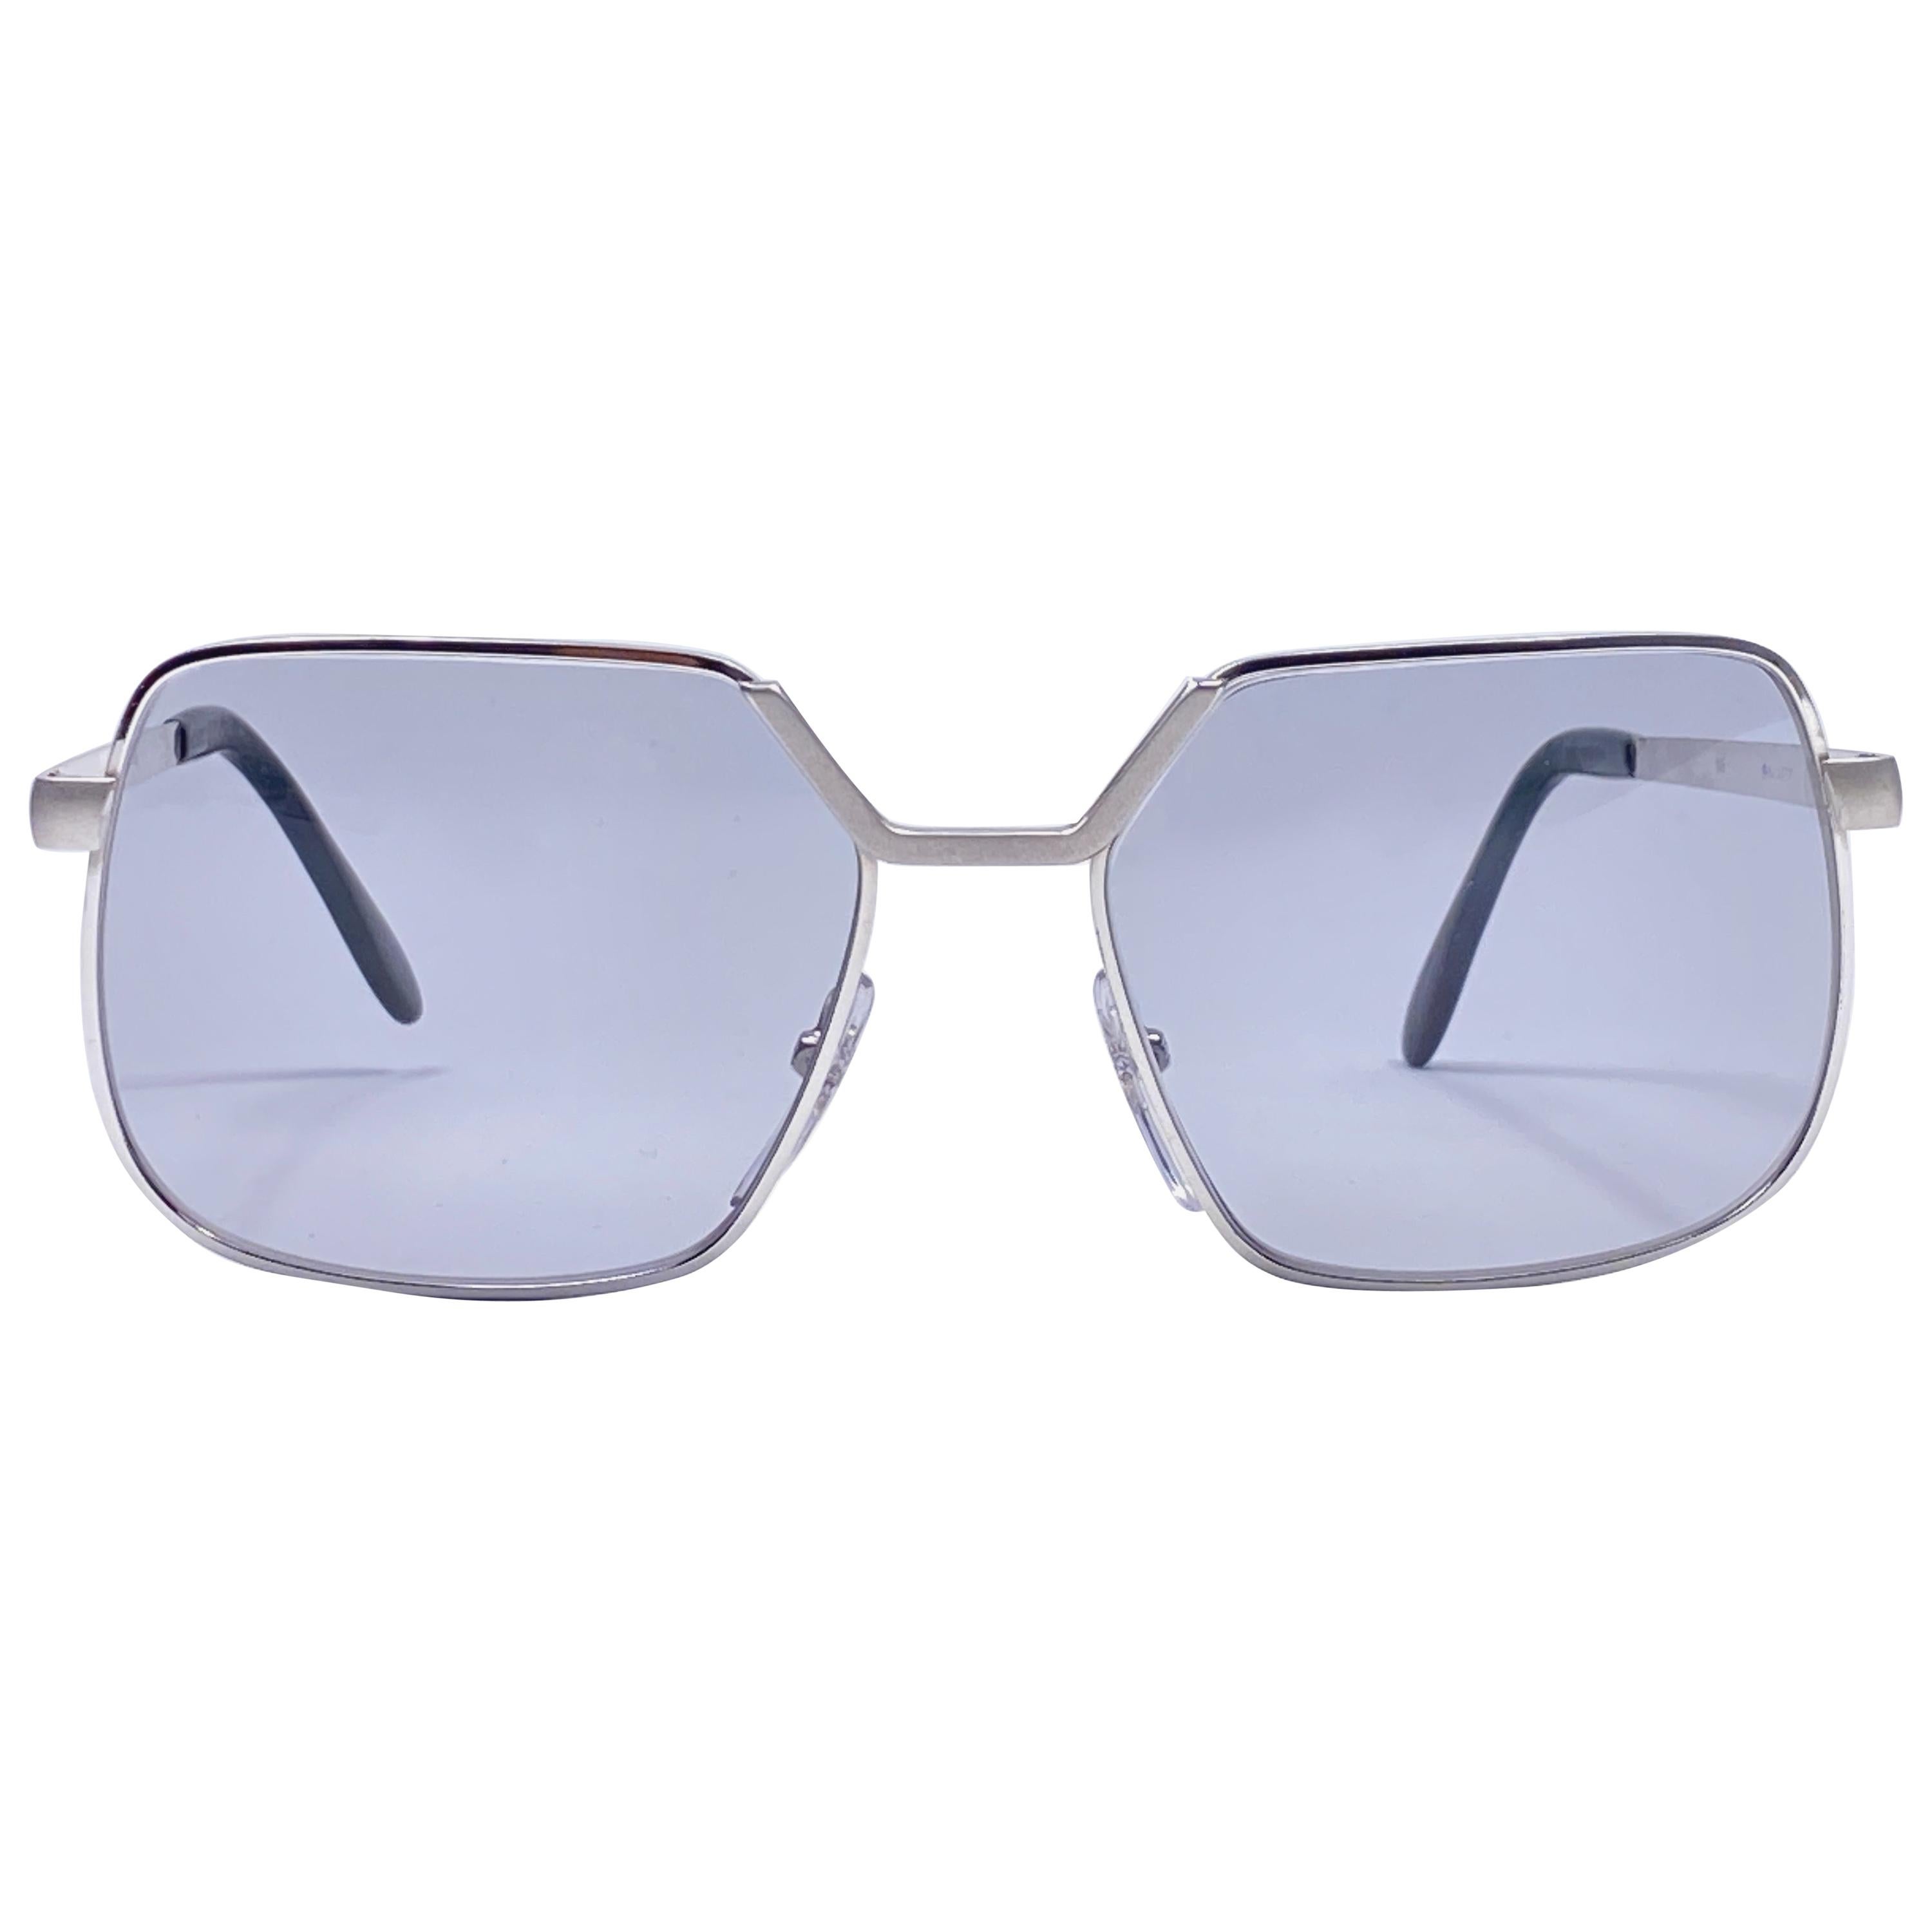 Vintage Rare Neostyle Smart Silver Matte Grey Changeable Lenses 1970 Sunglasses For Sale